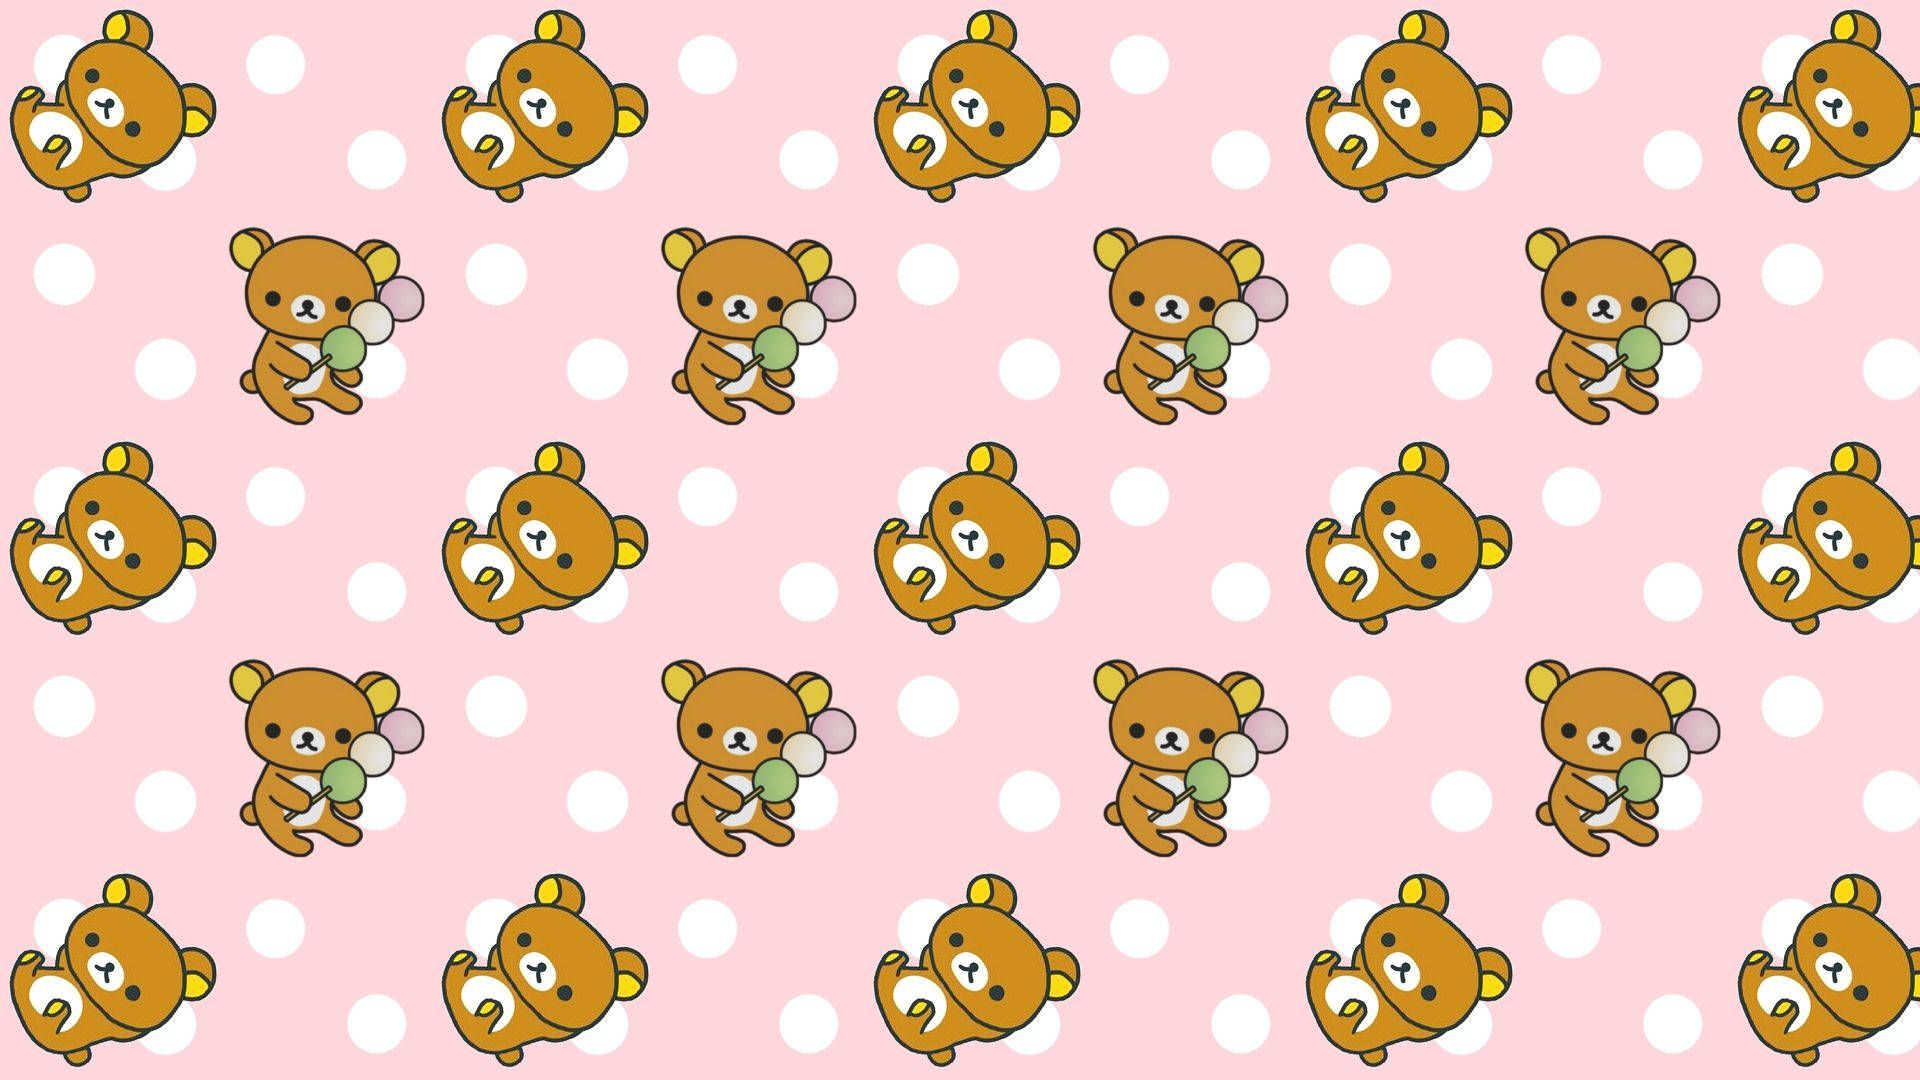 A pattern of bears on pink polka dots - Kidcore